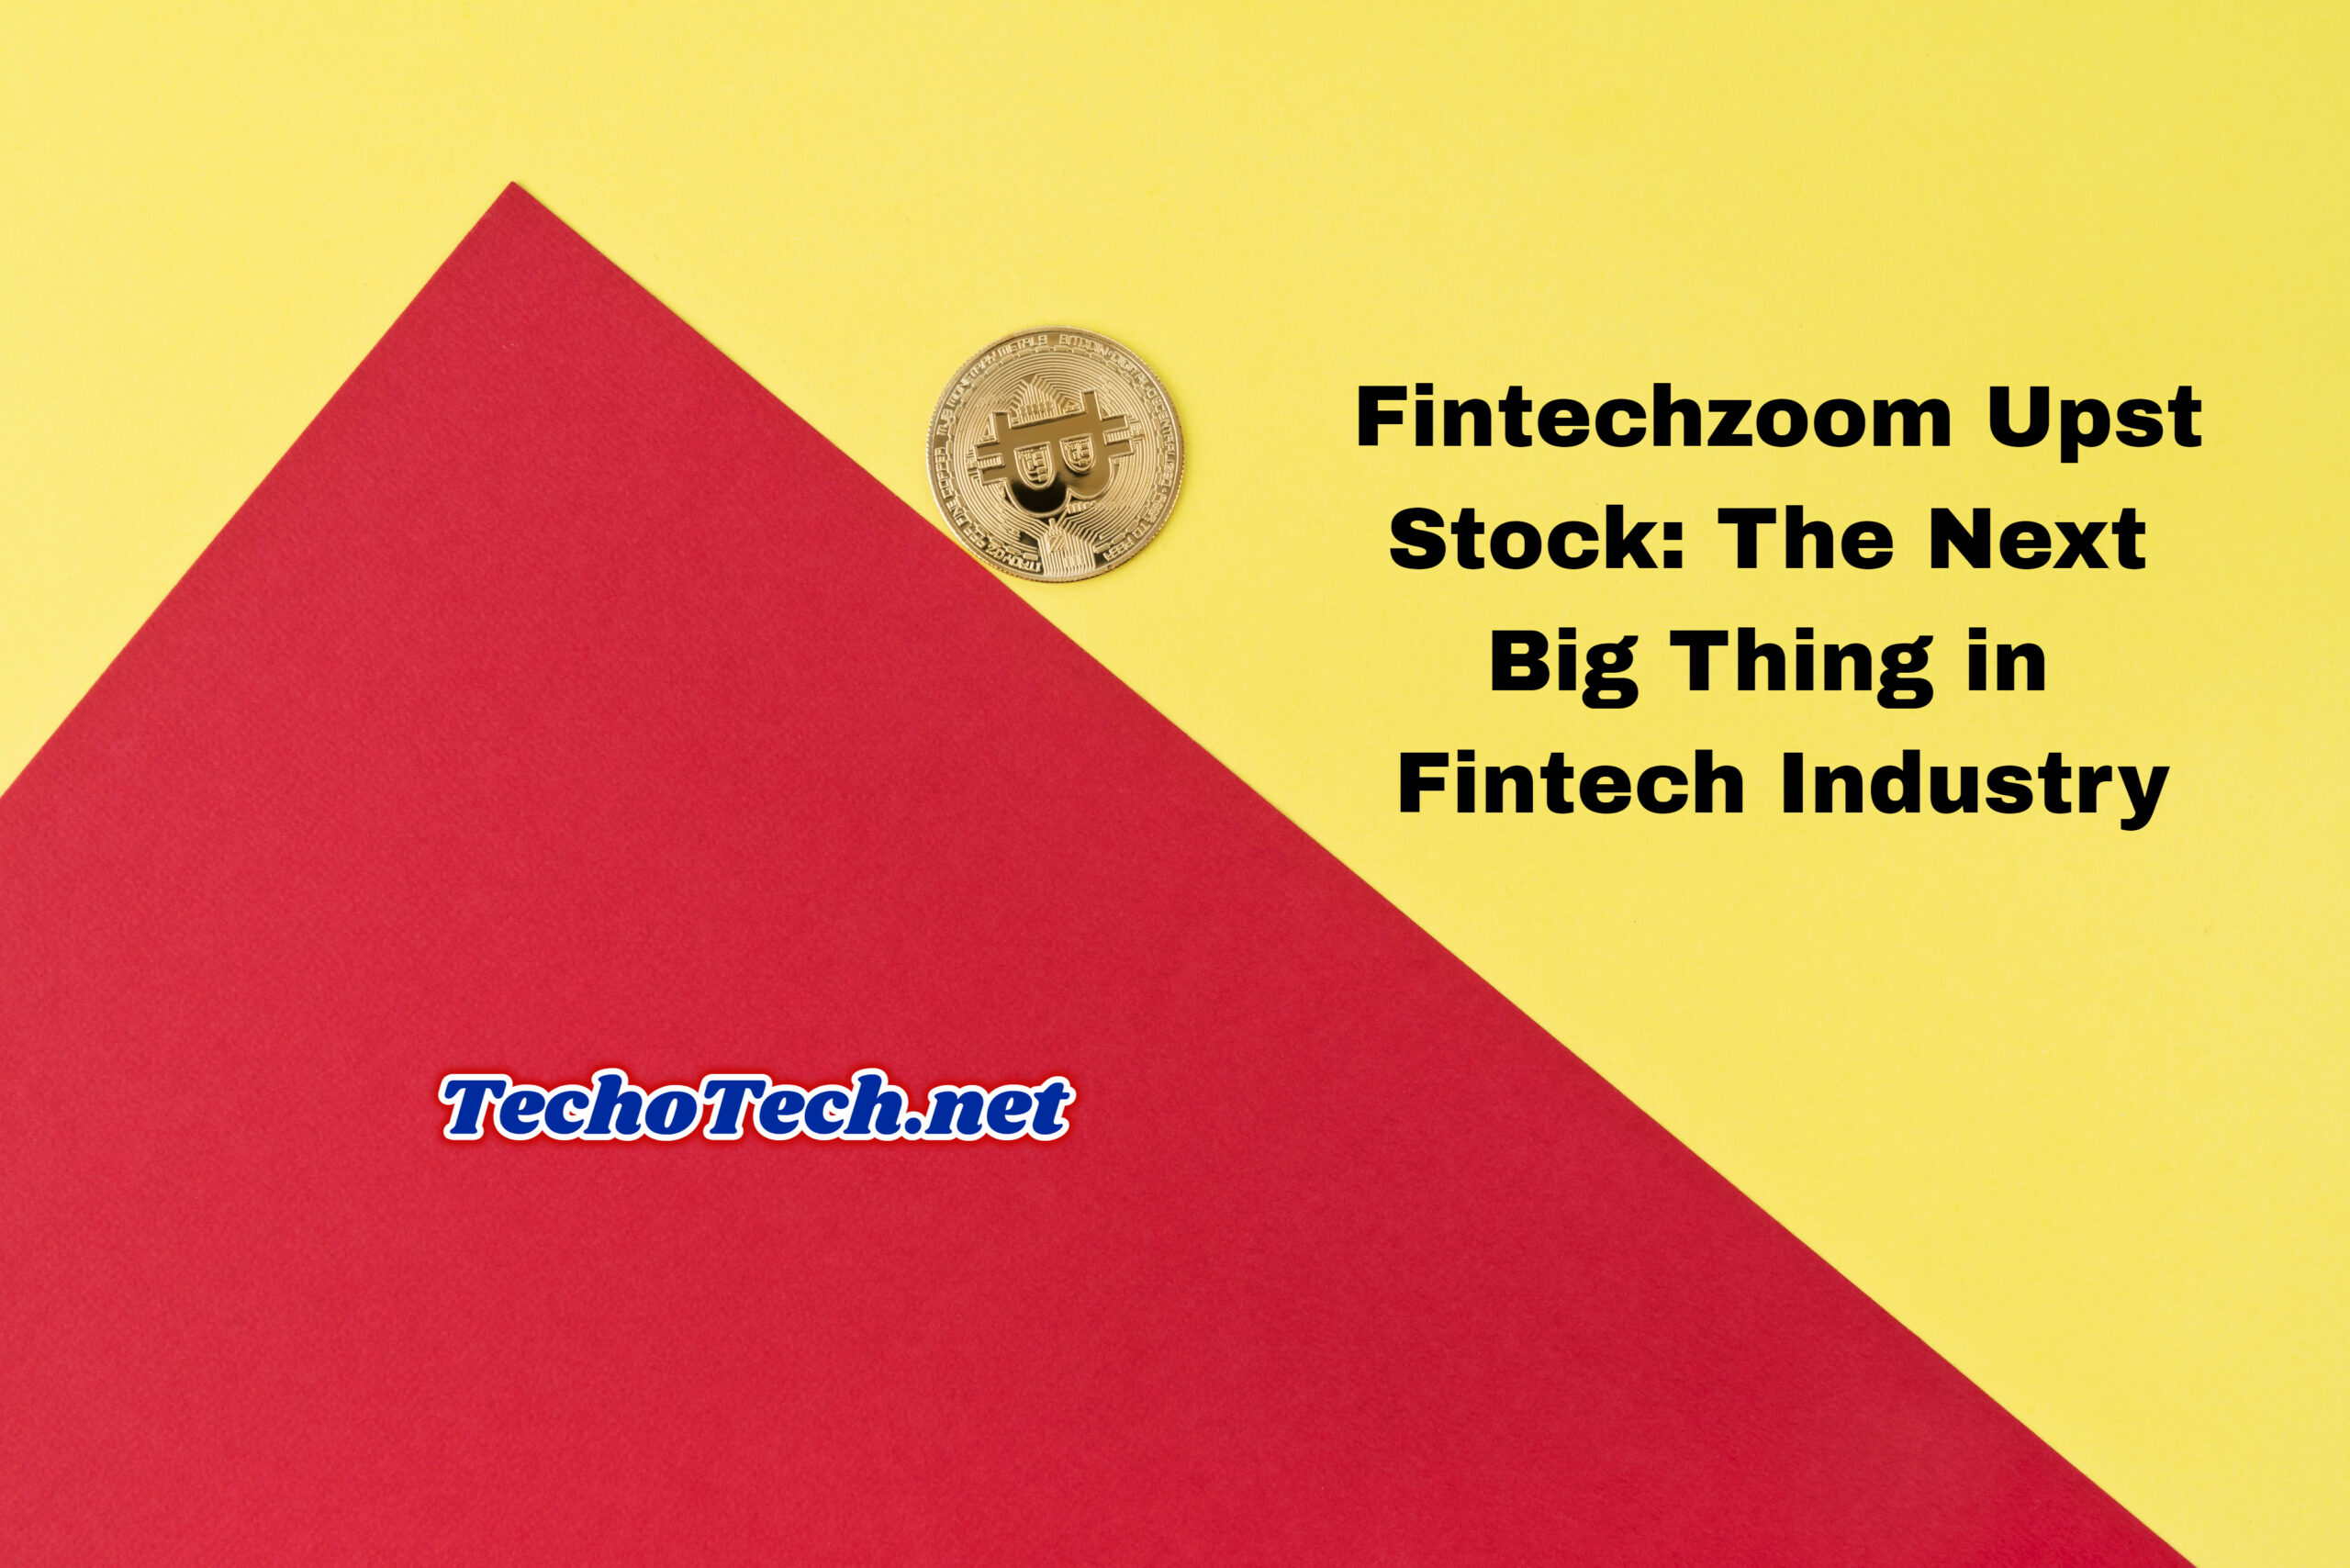 Fintechzoom Upst Stock: The Next Big Thing in Fintech Industry